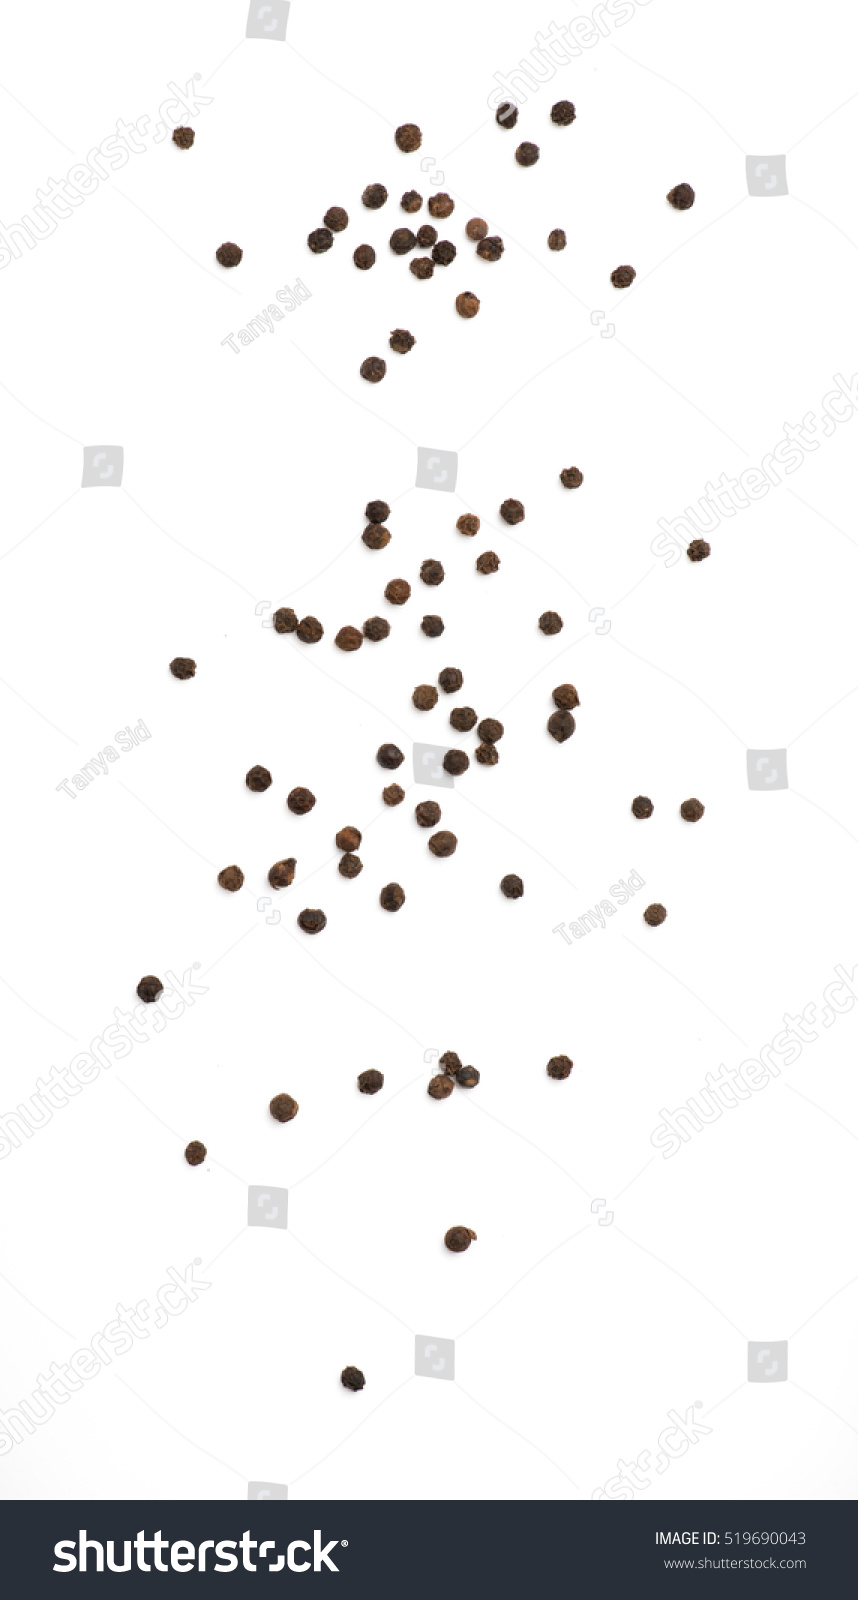 Black pepper isolated on white background. Spices. Top view. #519690043